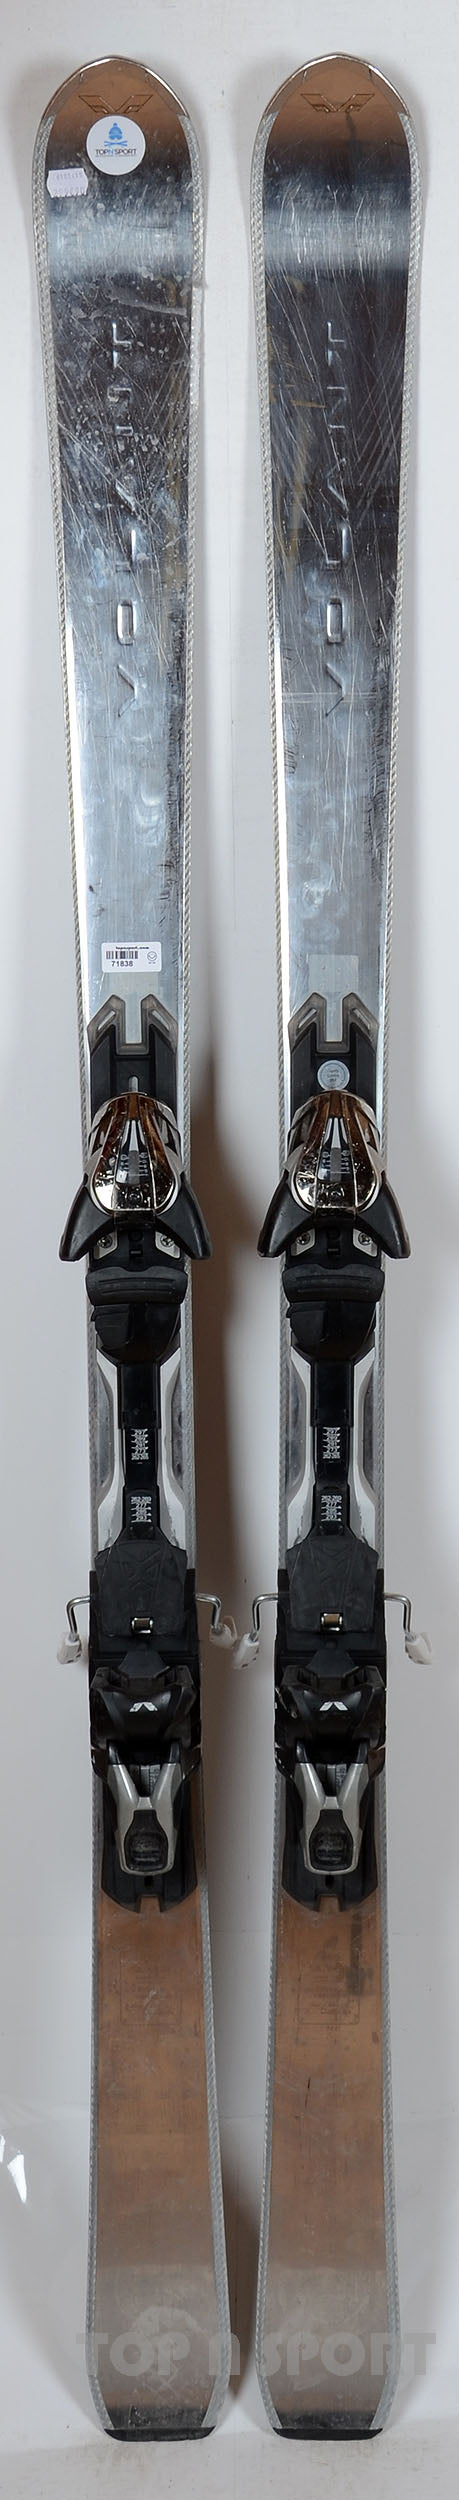 Volant PURE SILVER Arg - skis d'occasion